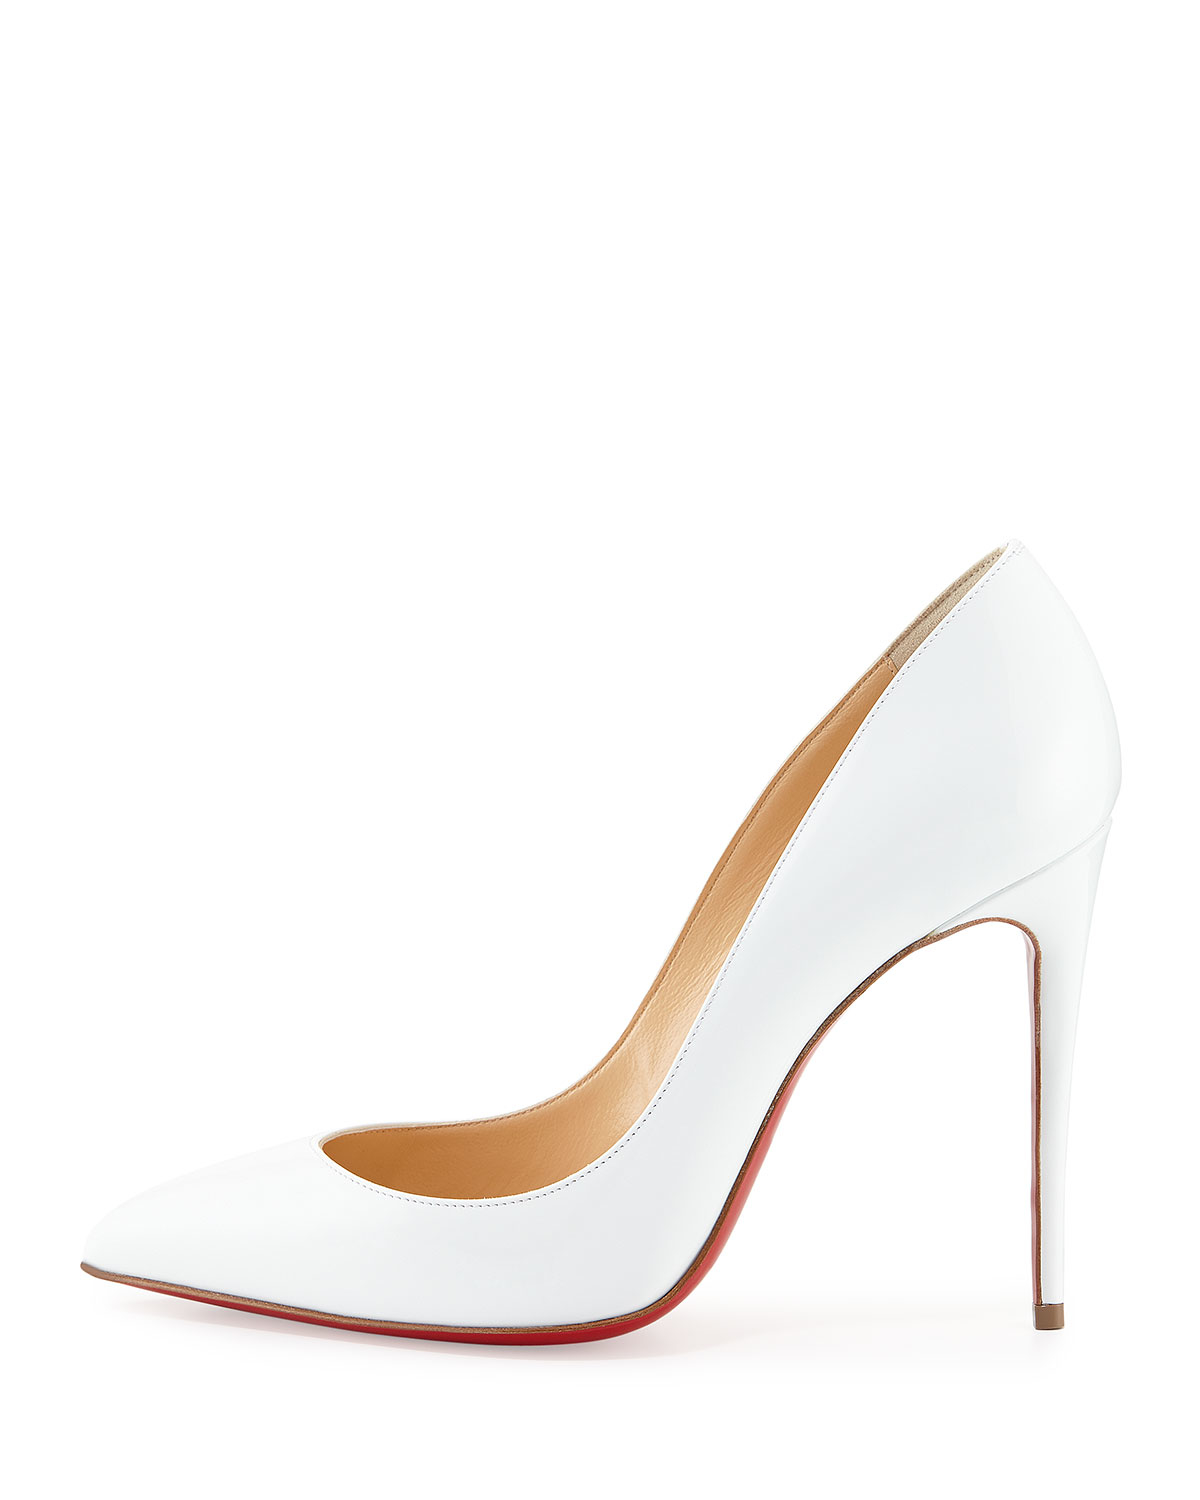 louboutin men shoes - Christian louboutin Pigalle Follies Point-toe Red Sole Pump in ...